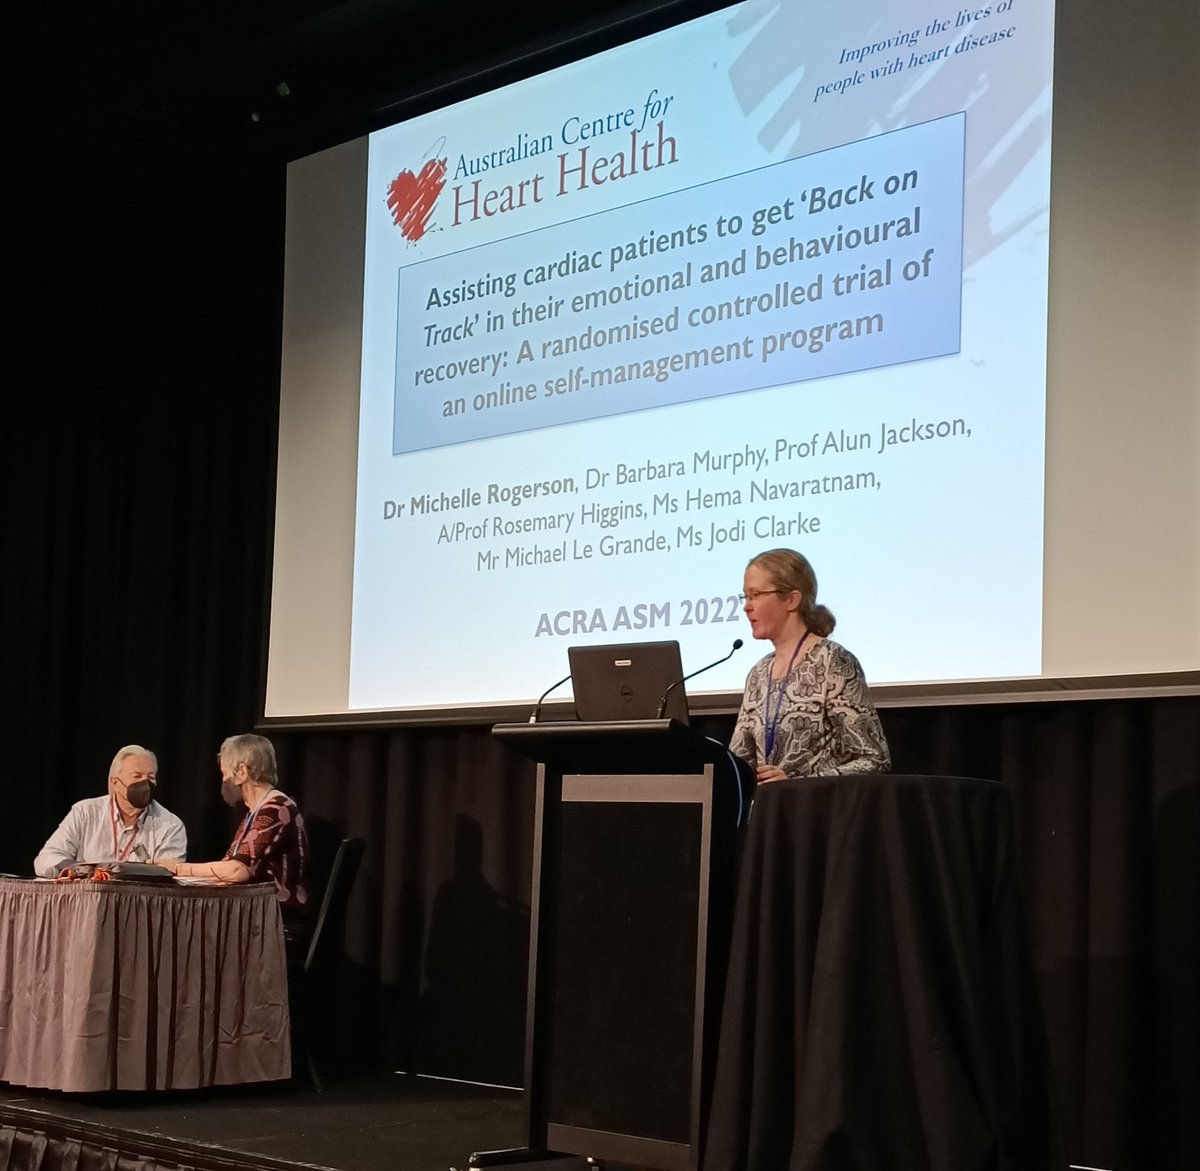 Dr Michelle Rogerson presents results of an online CBT/MI program for cardiac patients 'Back on Track' Behavioural and emotional benefits were observed by 6 months after intervention. #ACRA2022 @aushearthealth @drbarbmurphy